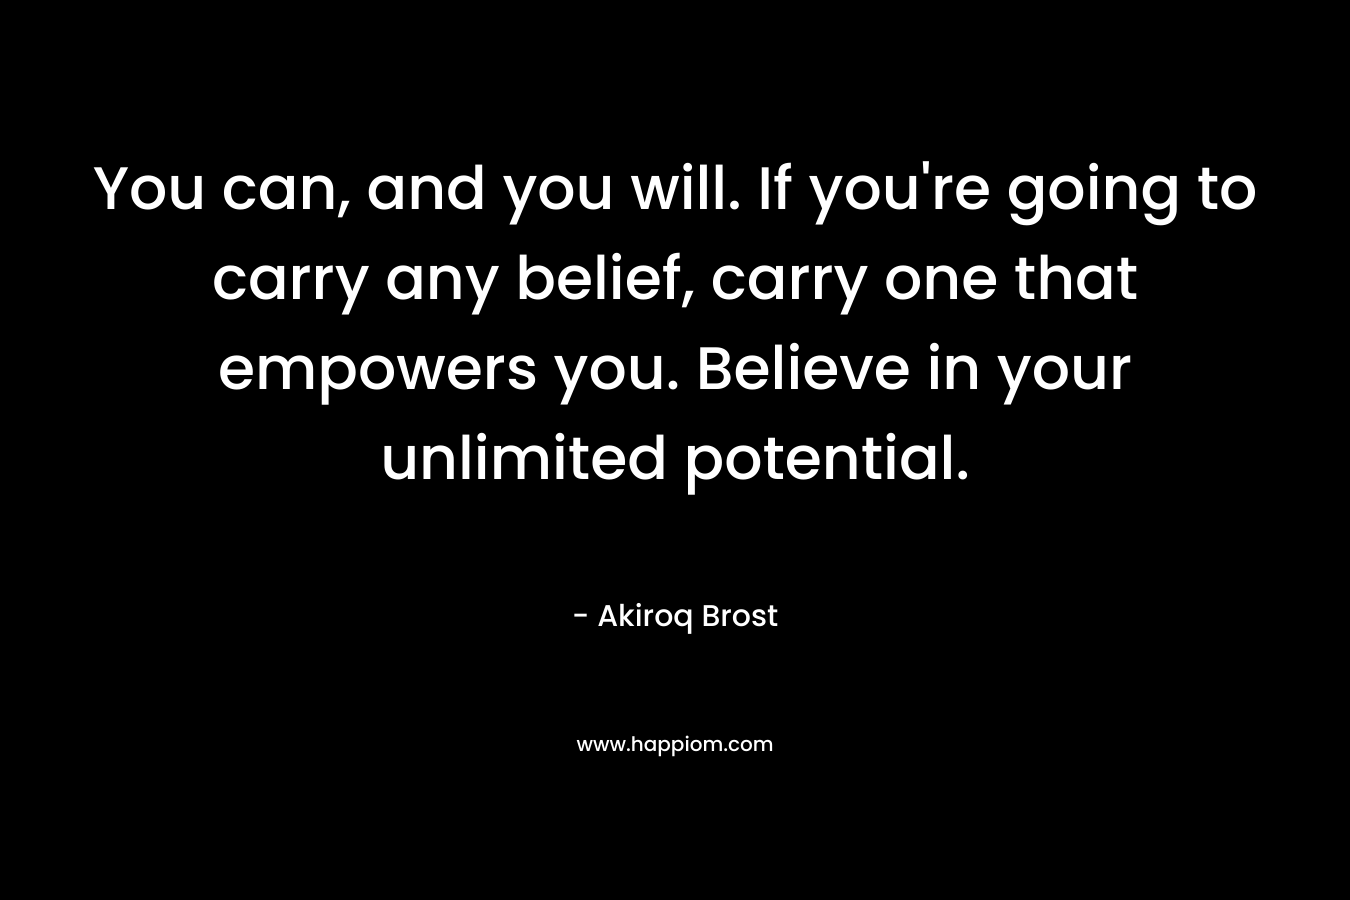 You can, and you will. If you’re going to carry any belief, carry one that empowers you. Believe in your unlimited potential. – Akiroq Brost